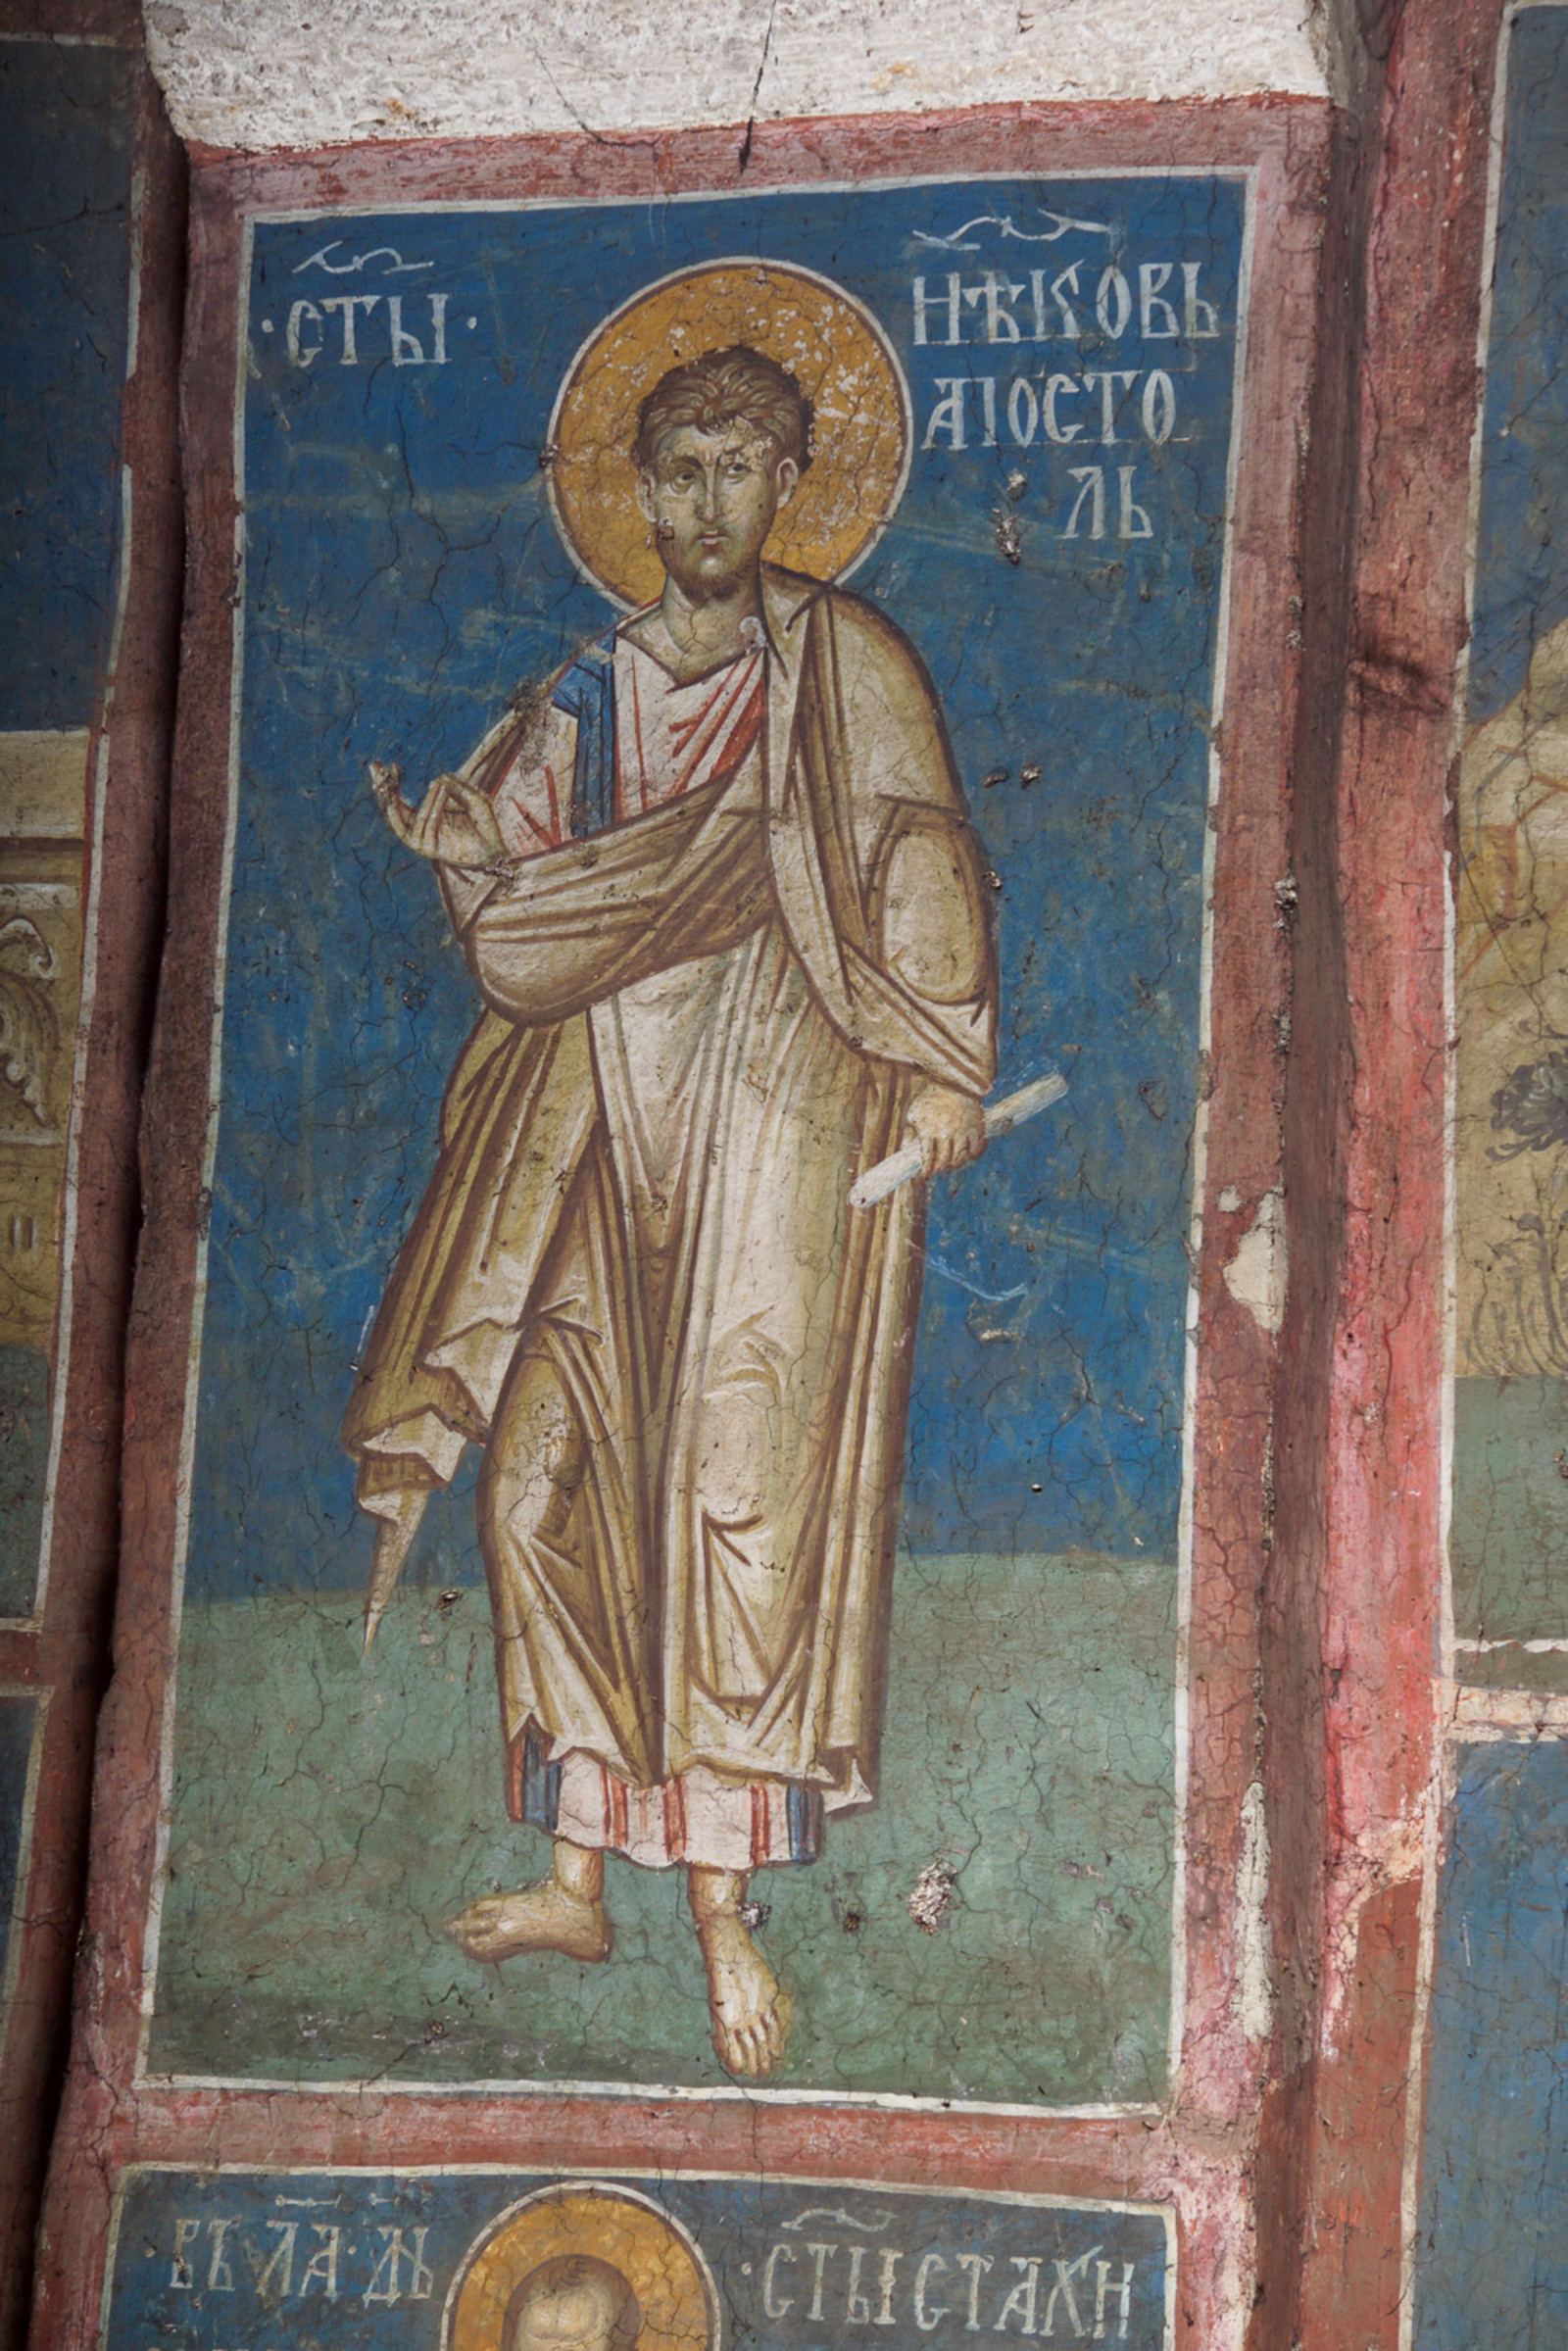 7IV-11 October 9 - The apostle James (figure)